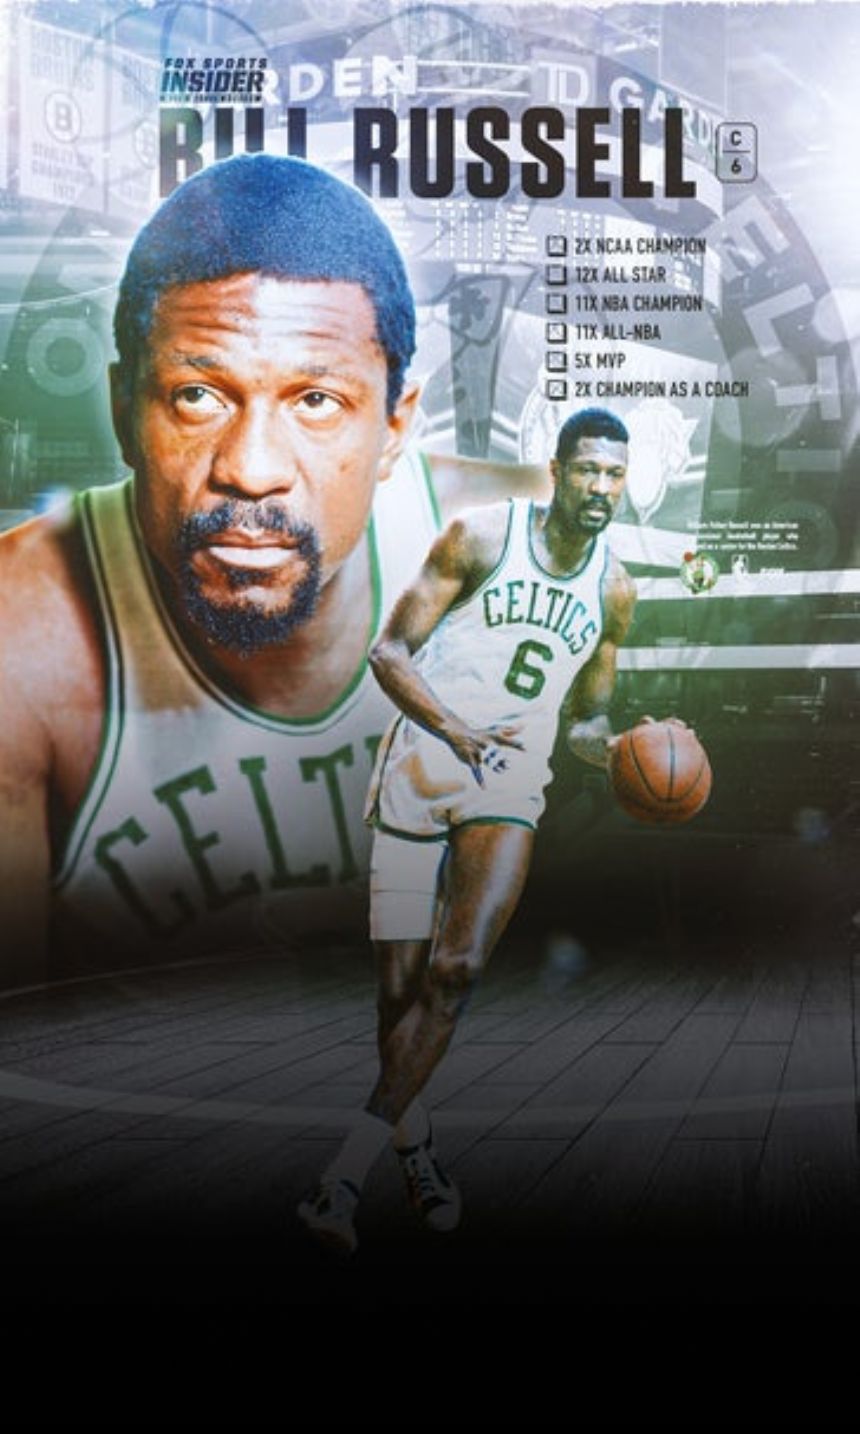 Bill Russell was, and still is, an unstoppable force